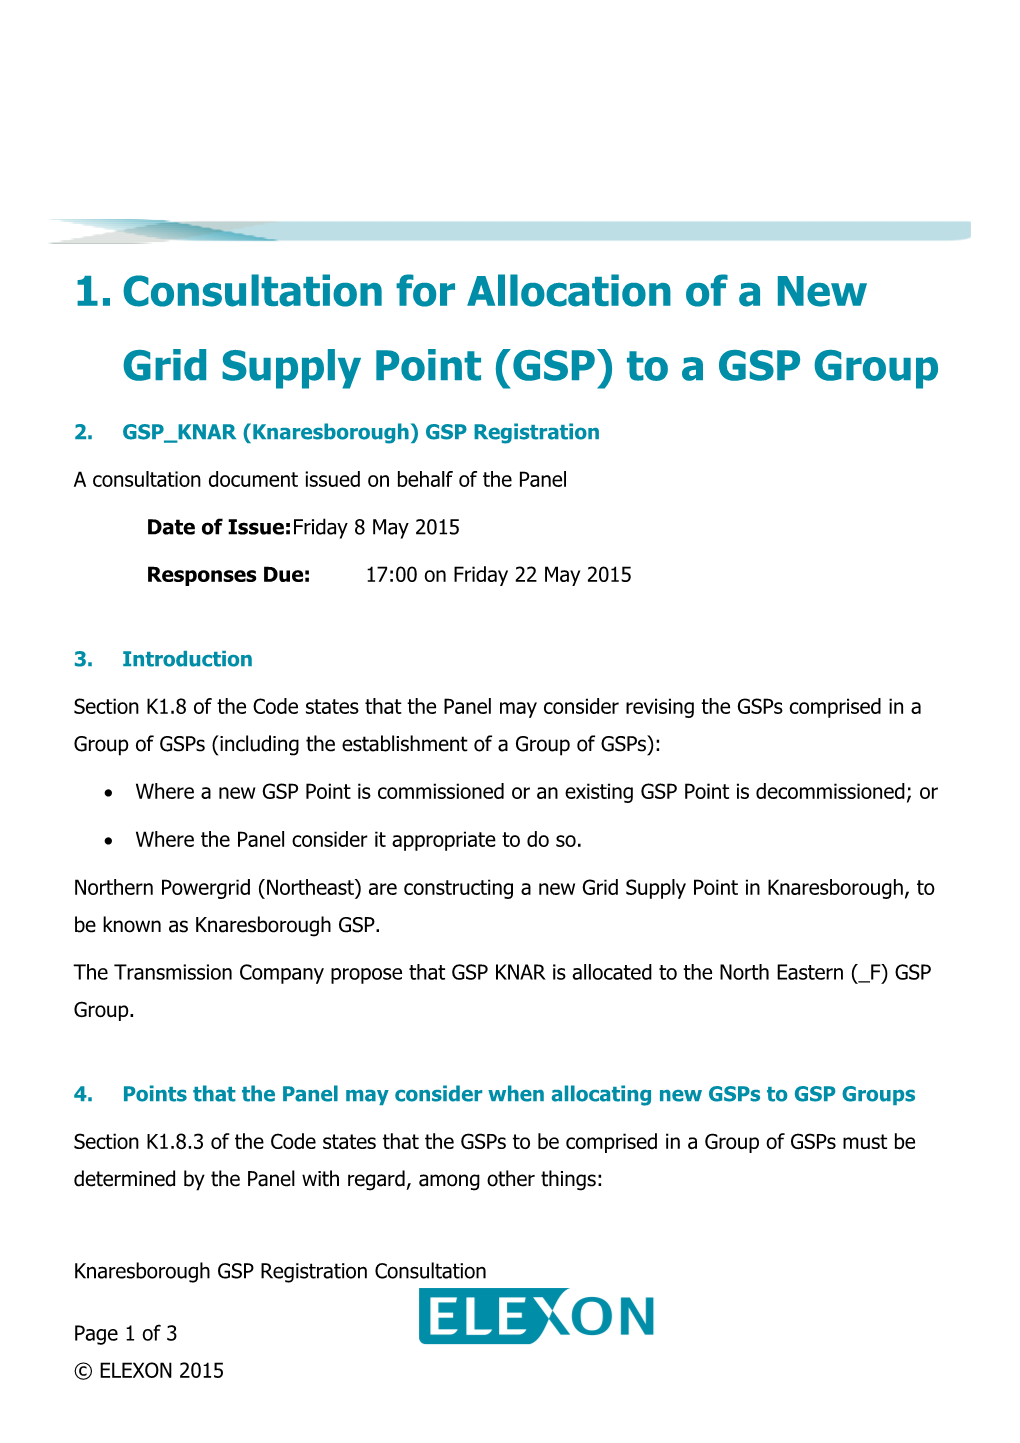 Consultation for Allocation of Anew Grid Supply Point (GSP) to a GSP Group